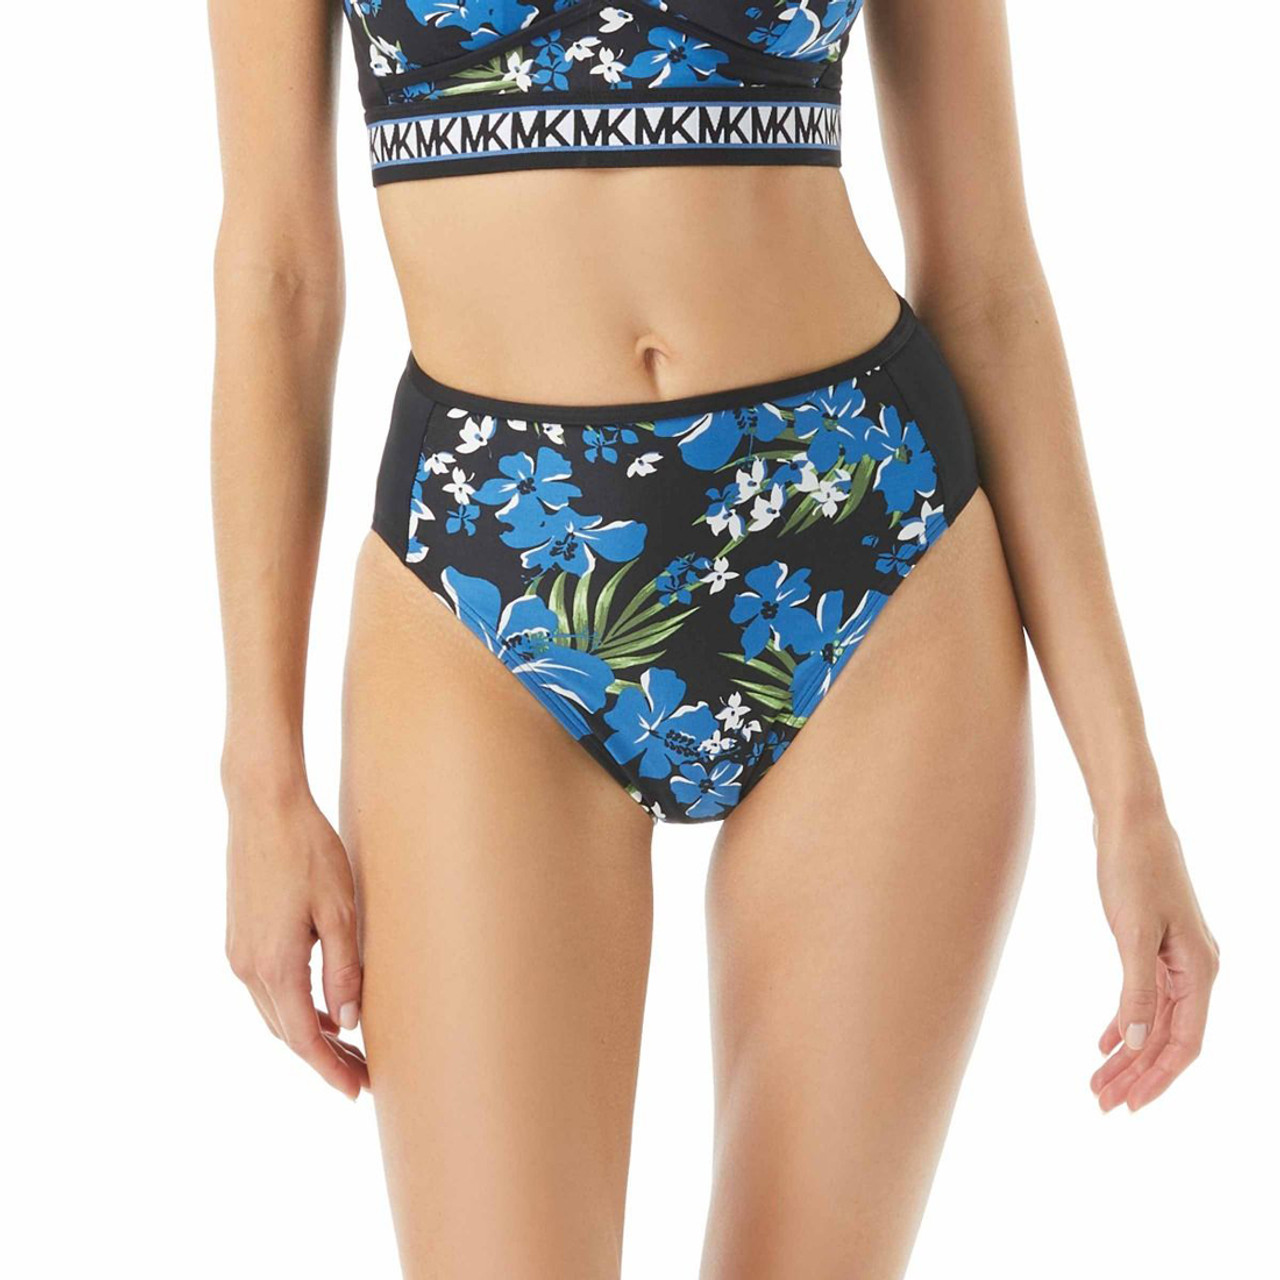 Michael Kors Bold Tropical Bliss High Waist Swimsuit, Multi, Small -  Discount Scrubs and Fashion